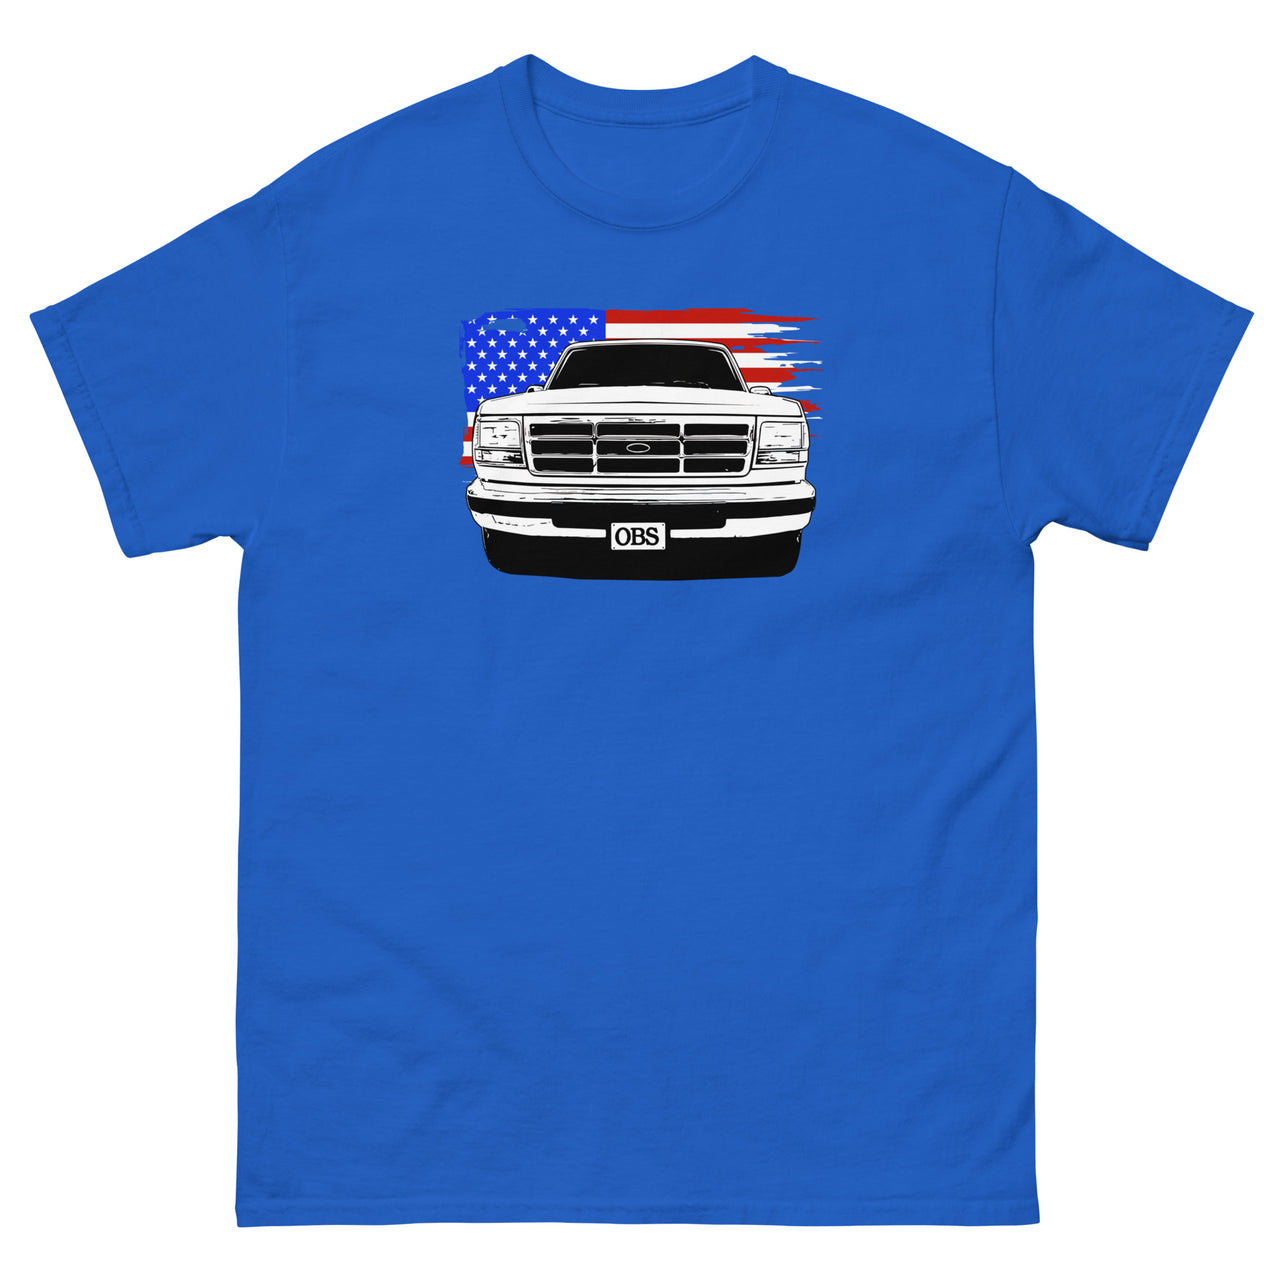 OBS Truck American Flag T-Shirt in blue